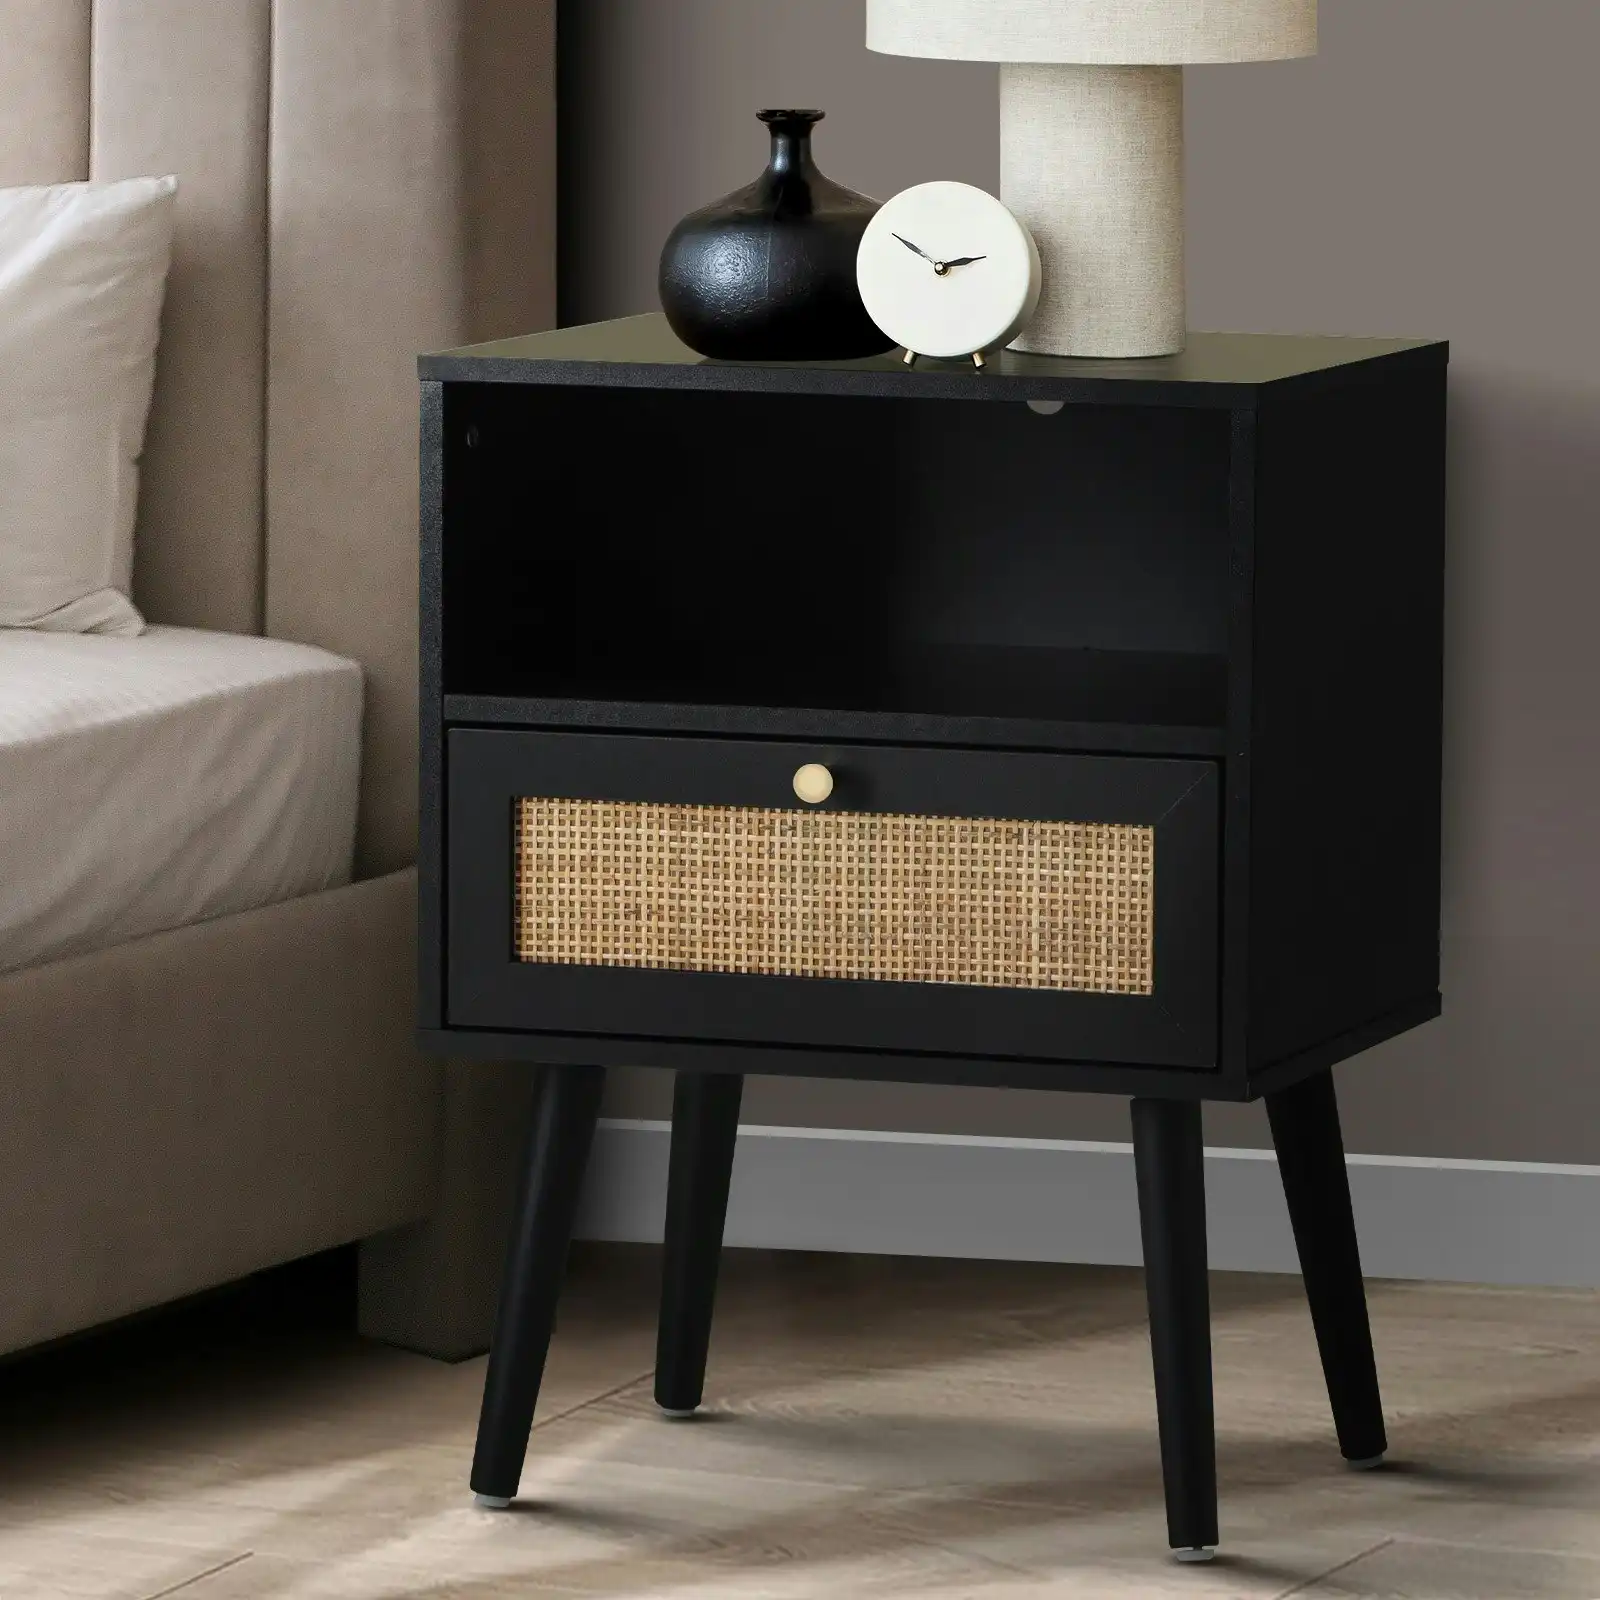 Oikiture Bedside Table Side Table Storage Drawer Shelf Nightstand Rattan Black